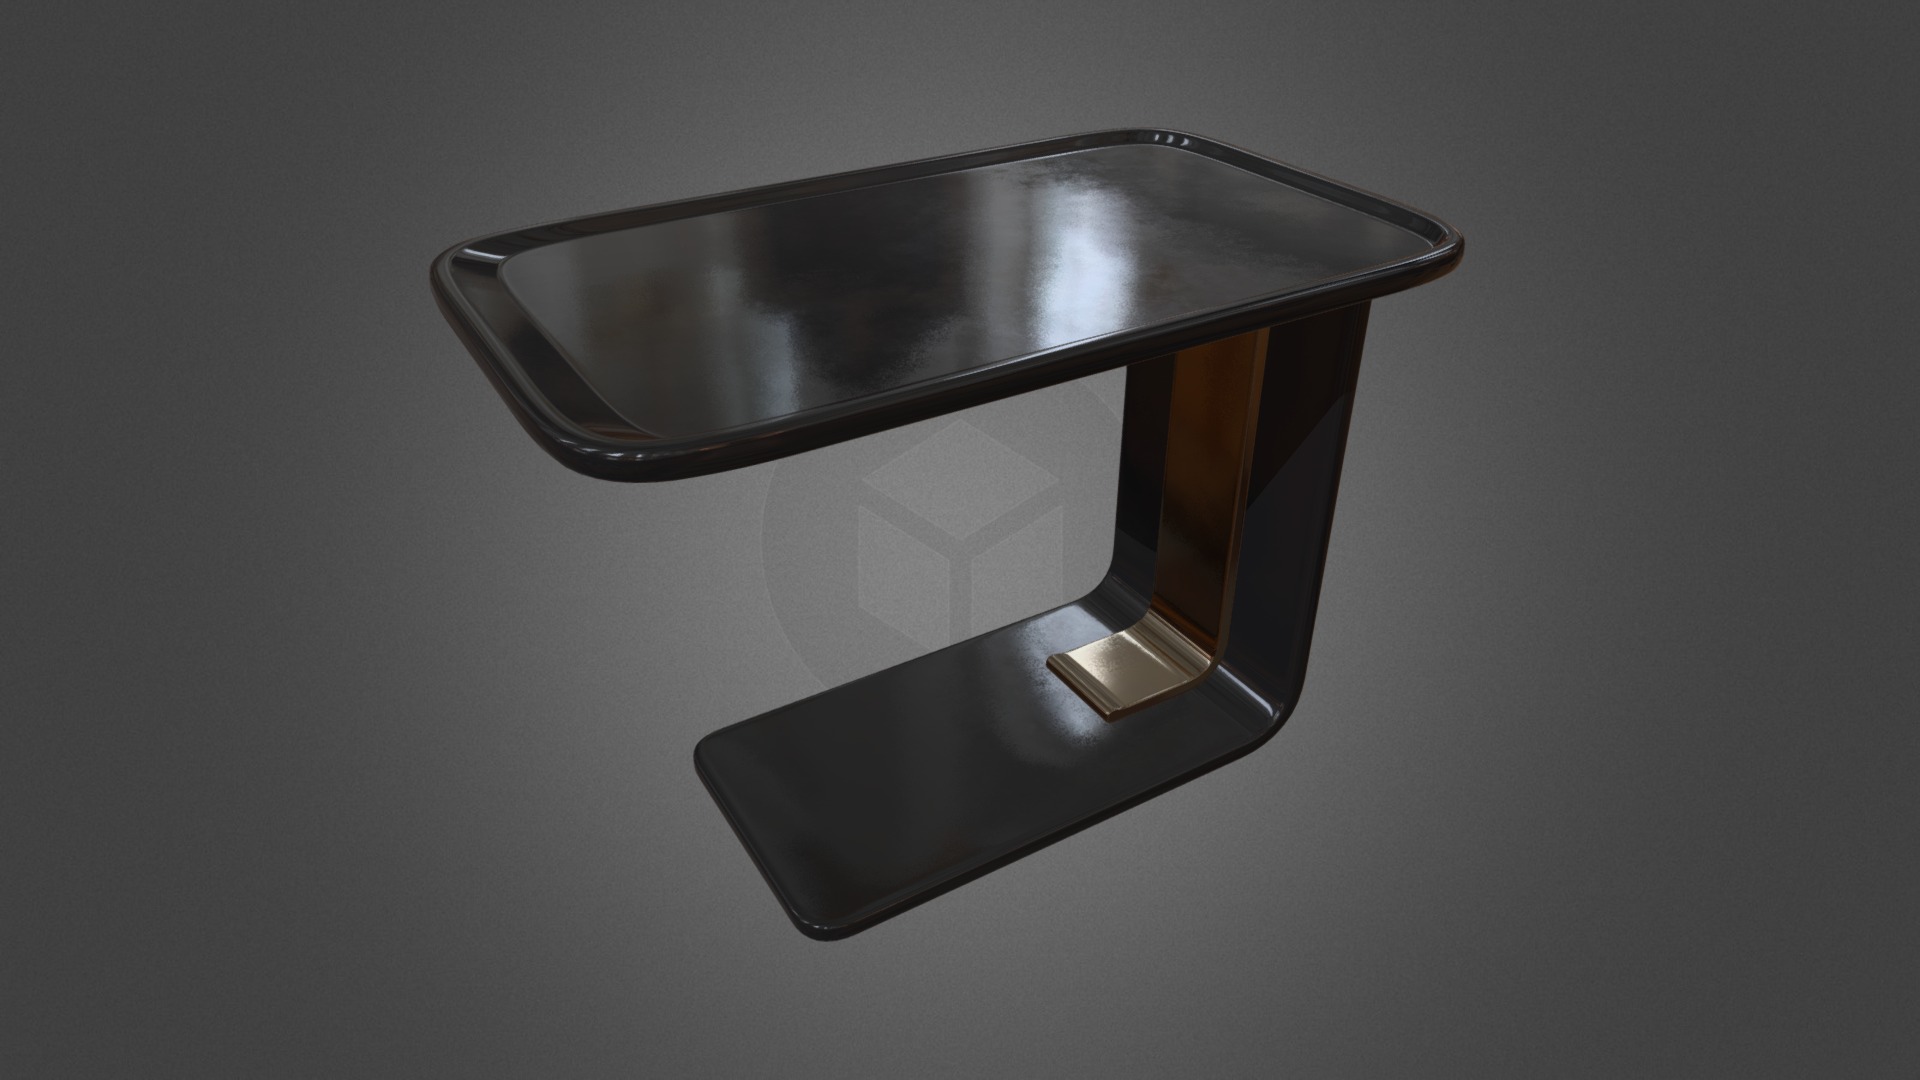 3D model Sacristain Side Table by Christian Liaigre - This is a 3D model of the Sacristain Side Table by Christian Liaigre. The 3D model is about a close-up of a light fixture.